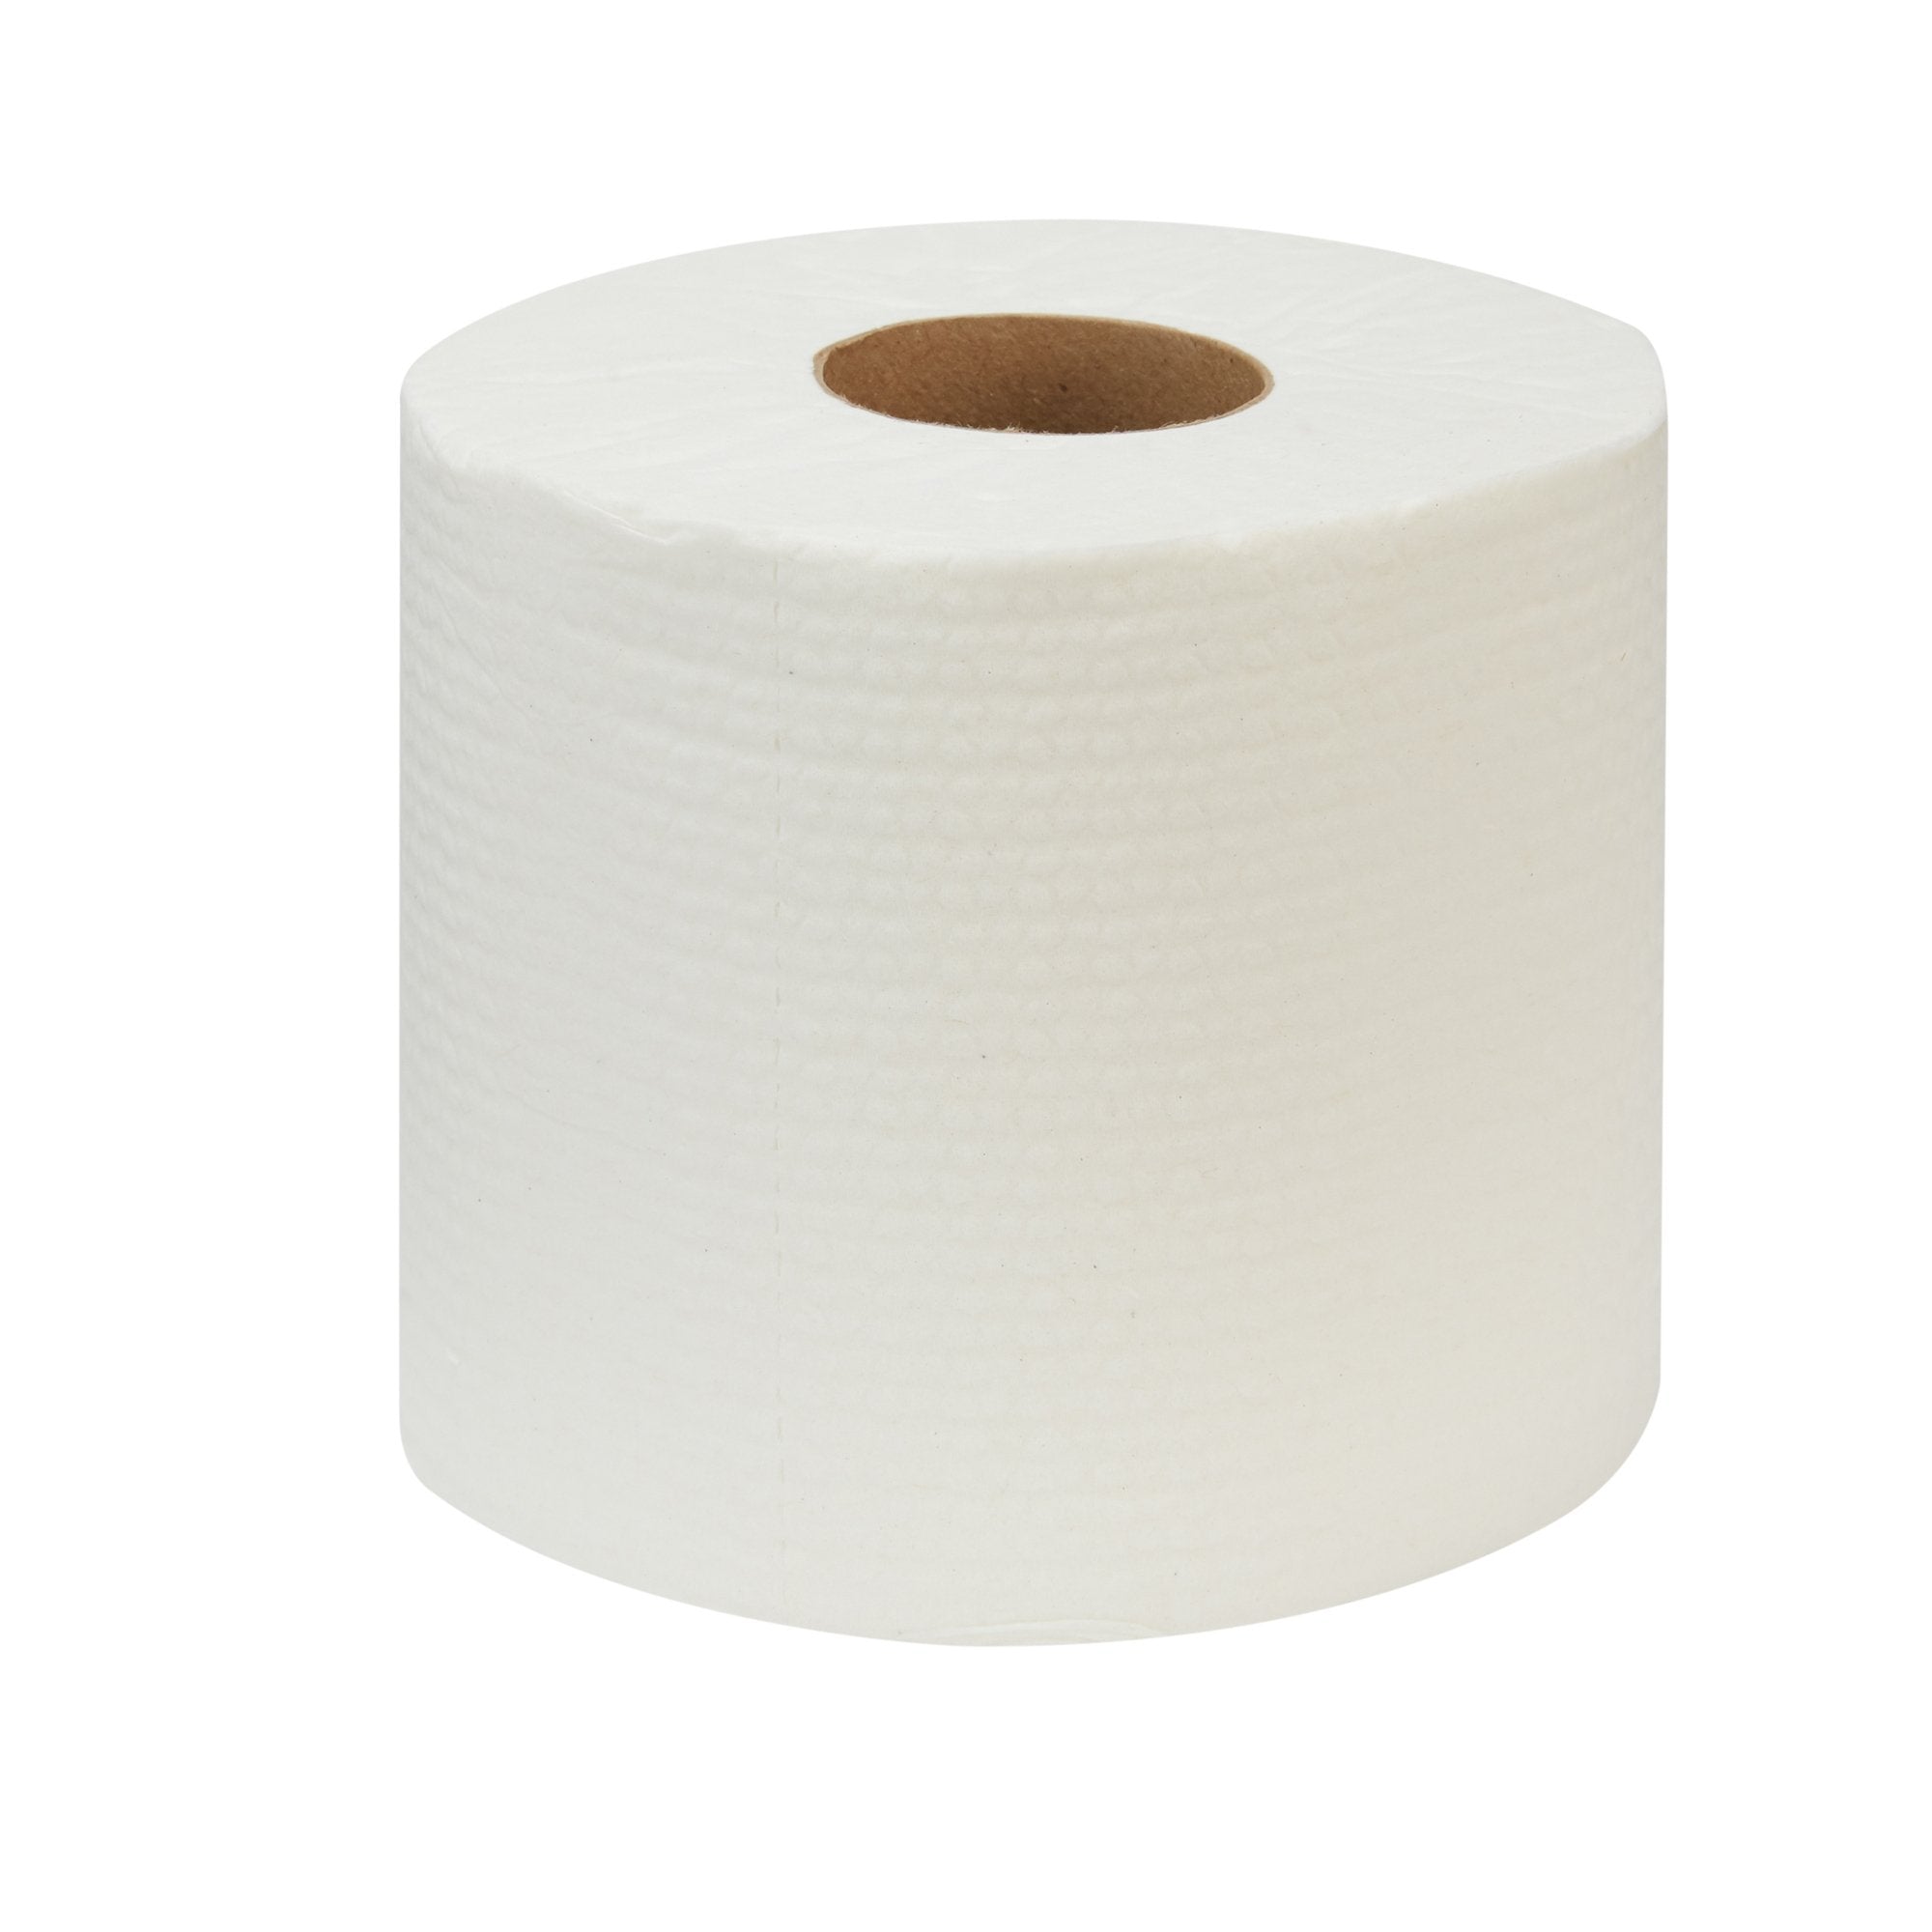 Toilet Tissue Kleenex® Cottonelle® Professional White 2-Ply Standard Size Cored Roll 451 Sheets 4 X 4 Inch